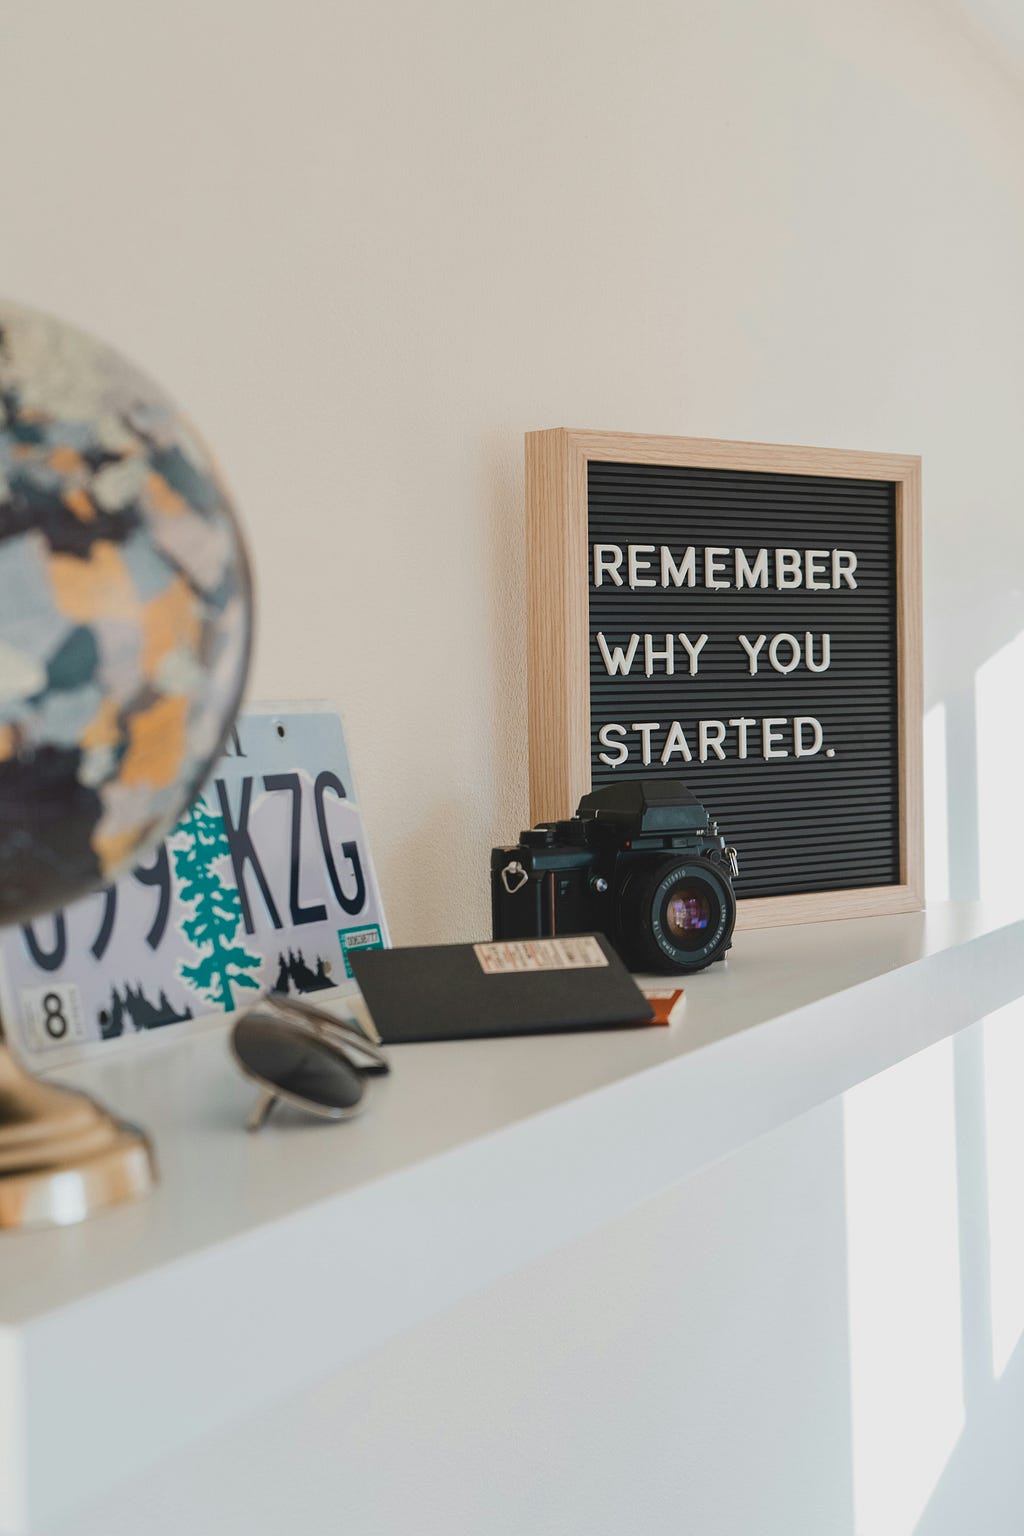 A picture frame sits on a shelf with the words inside the frame saying “Remember why you started”